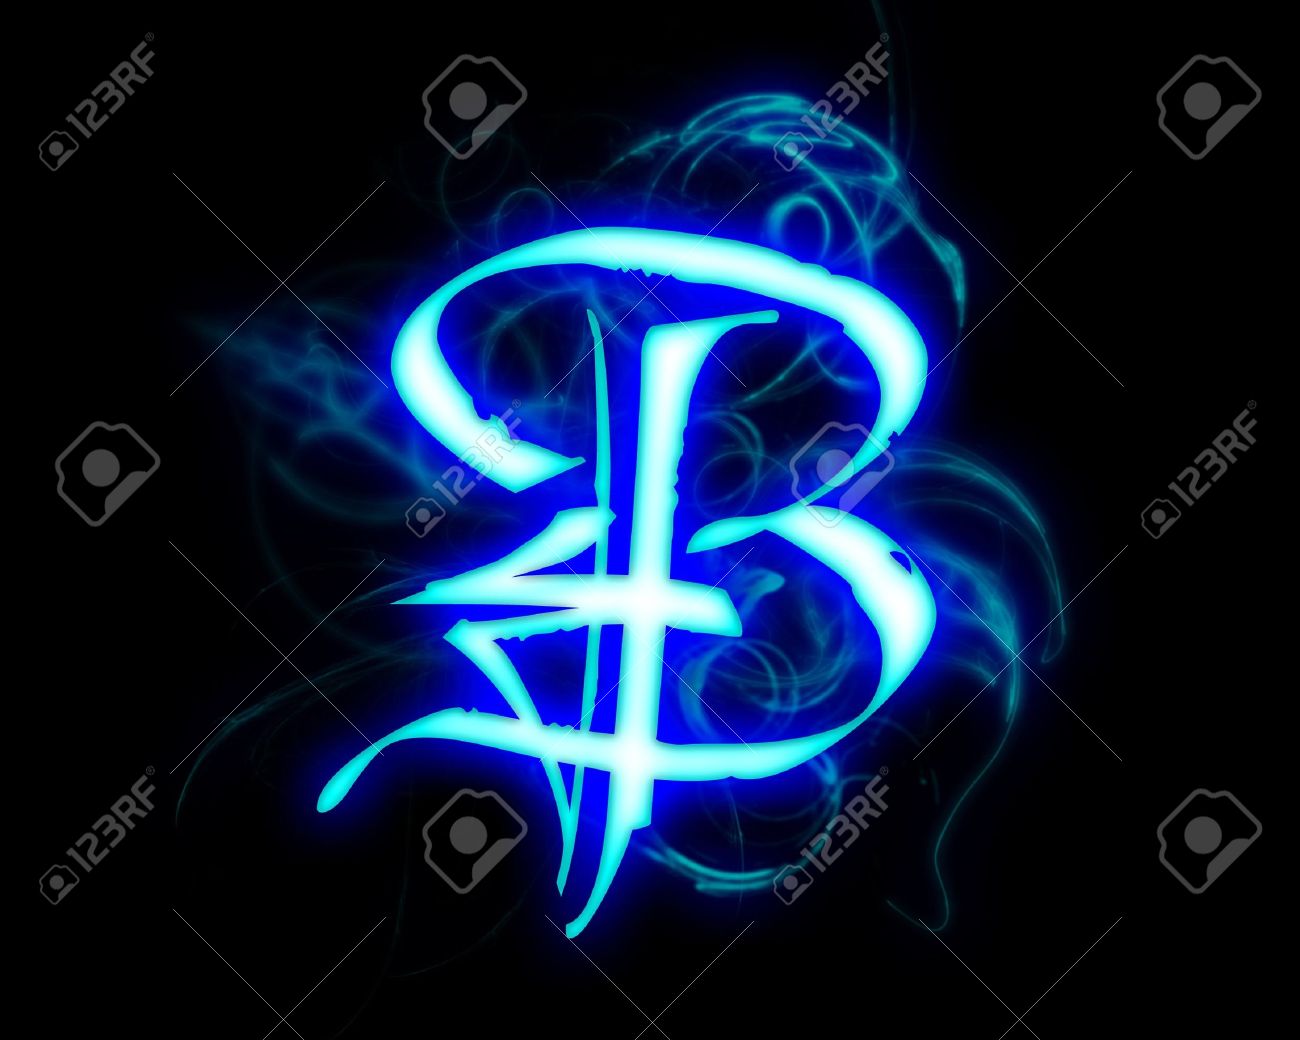 Blue Flame Magic Font Over Black Background Letter B Stock Photo